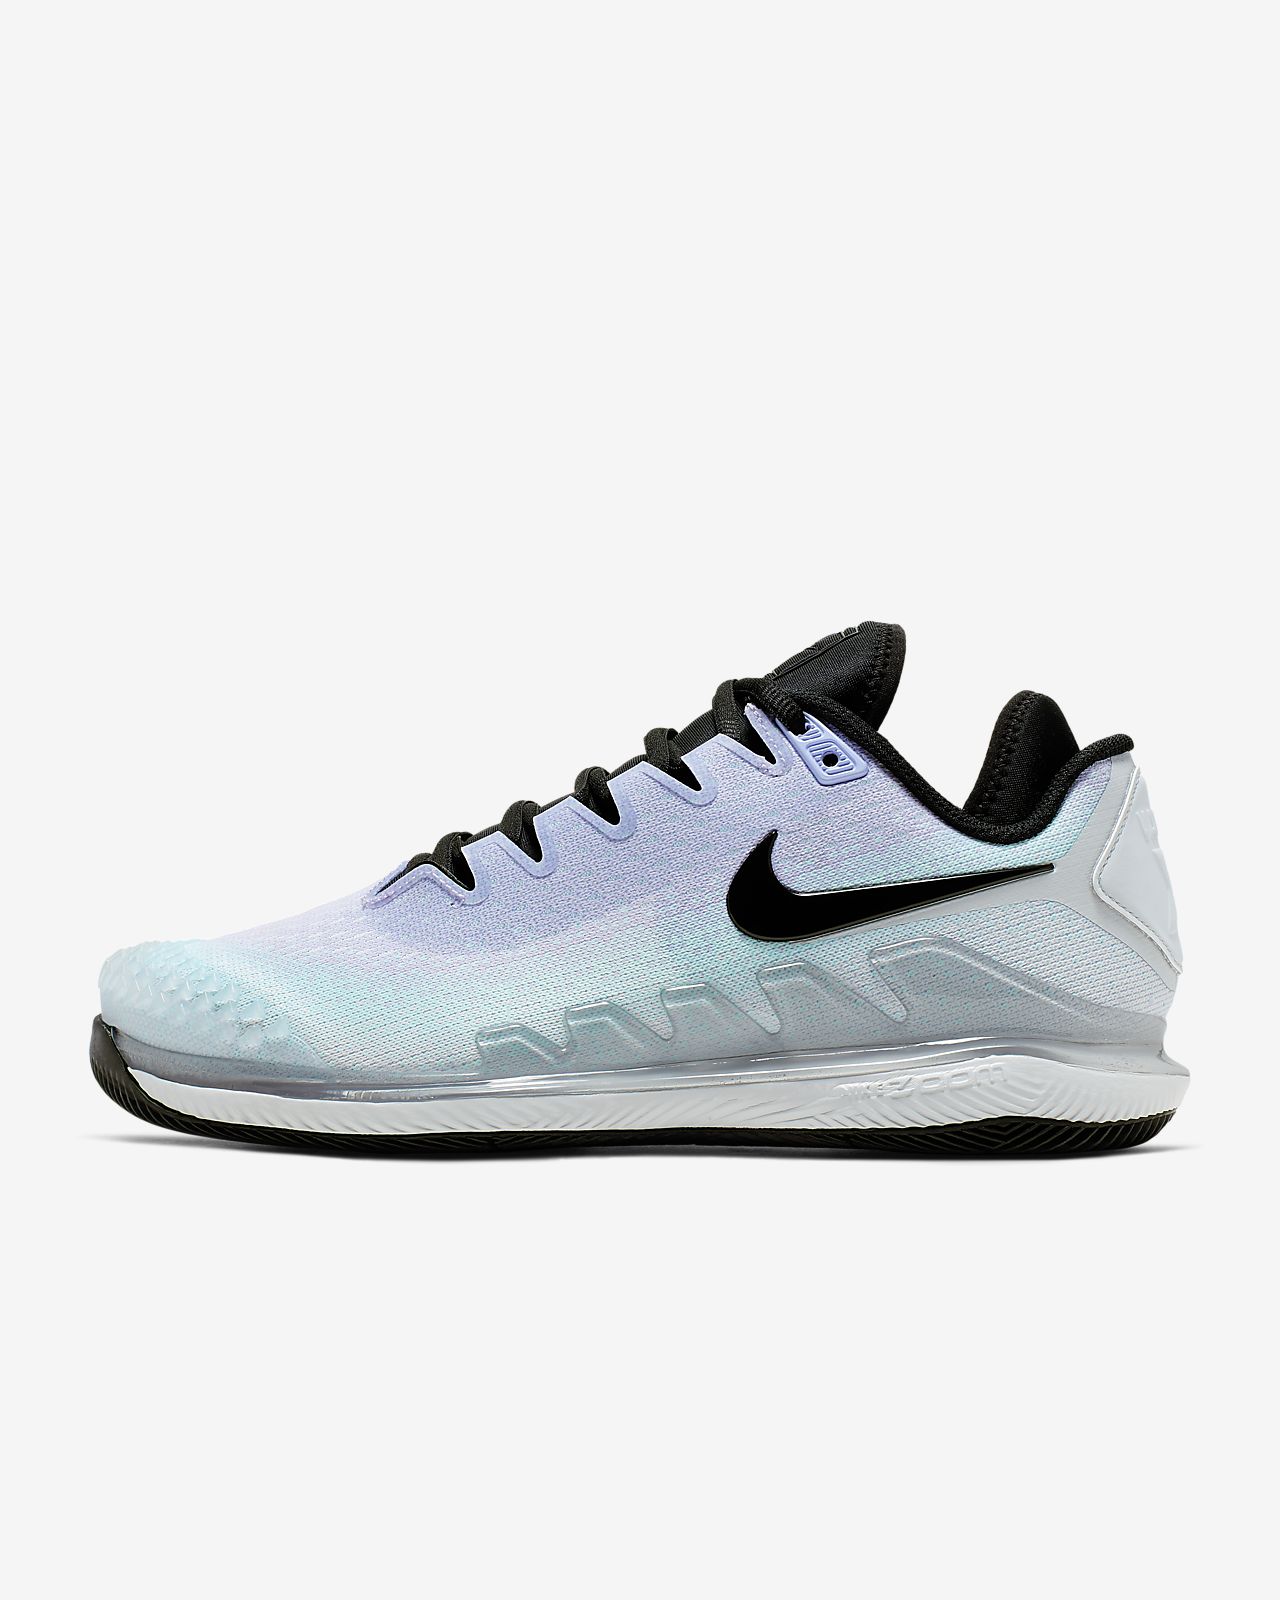 Nike Zoom Vapor X Knit Flash Sales, UP TO 56% OFF